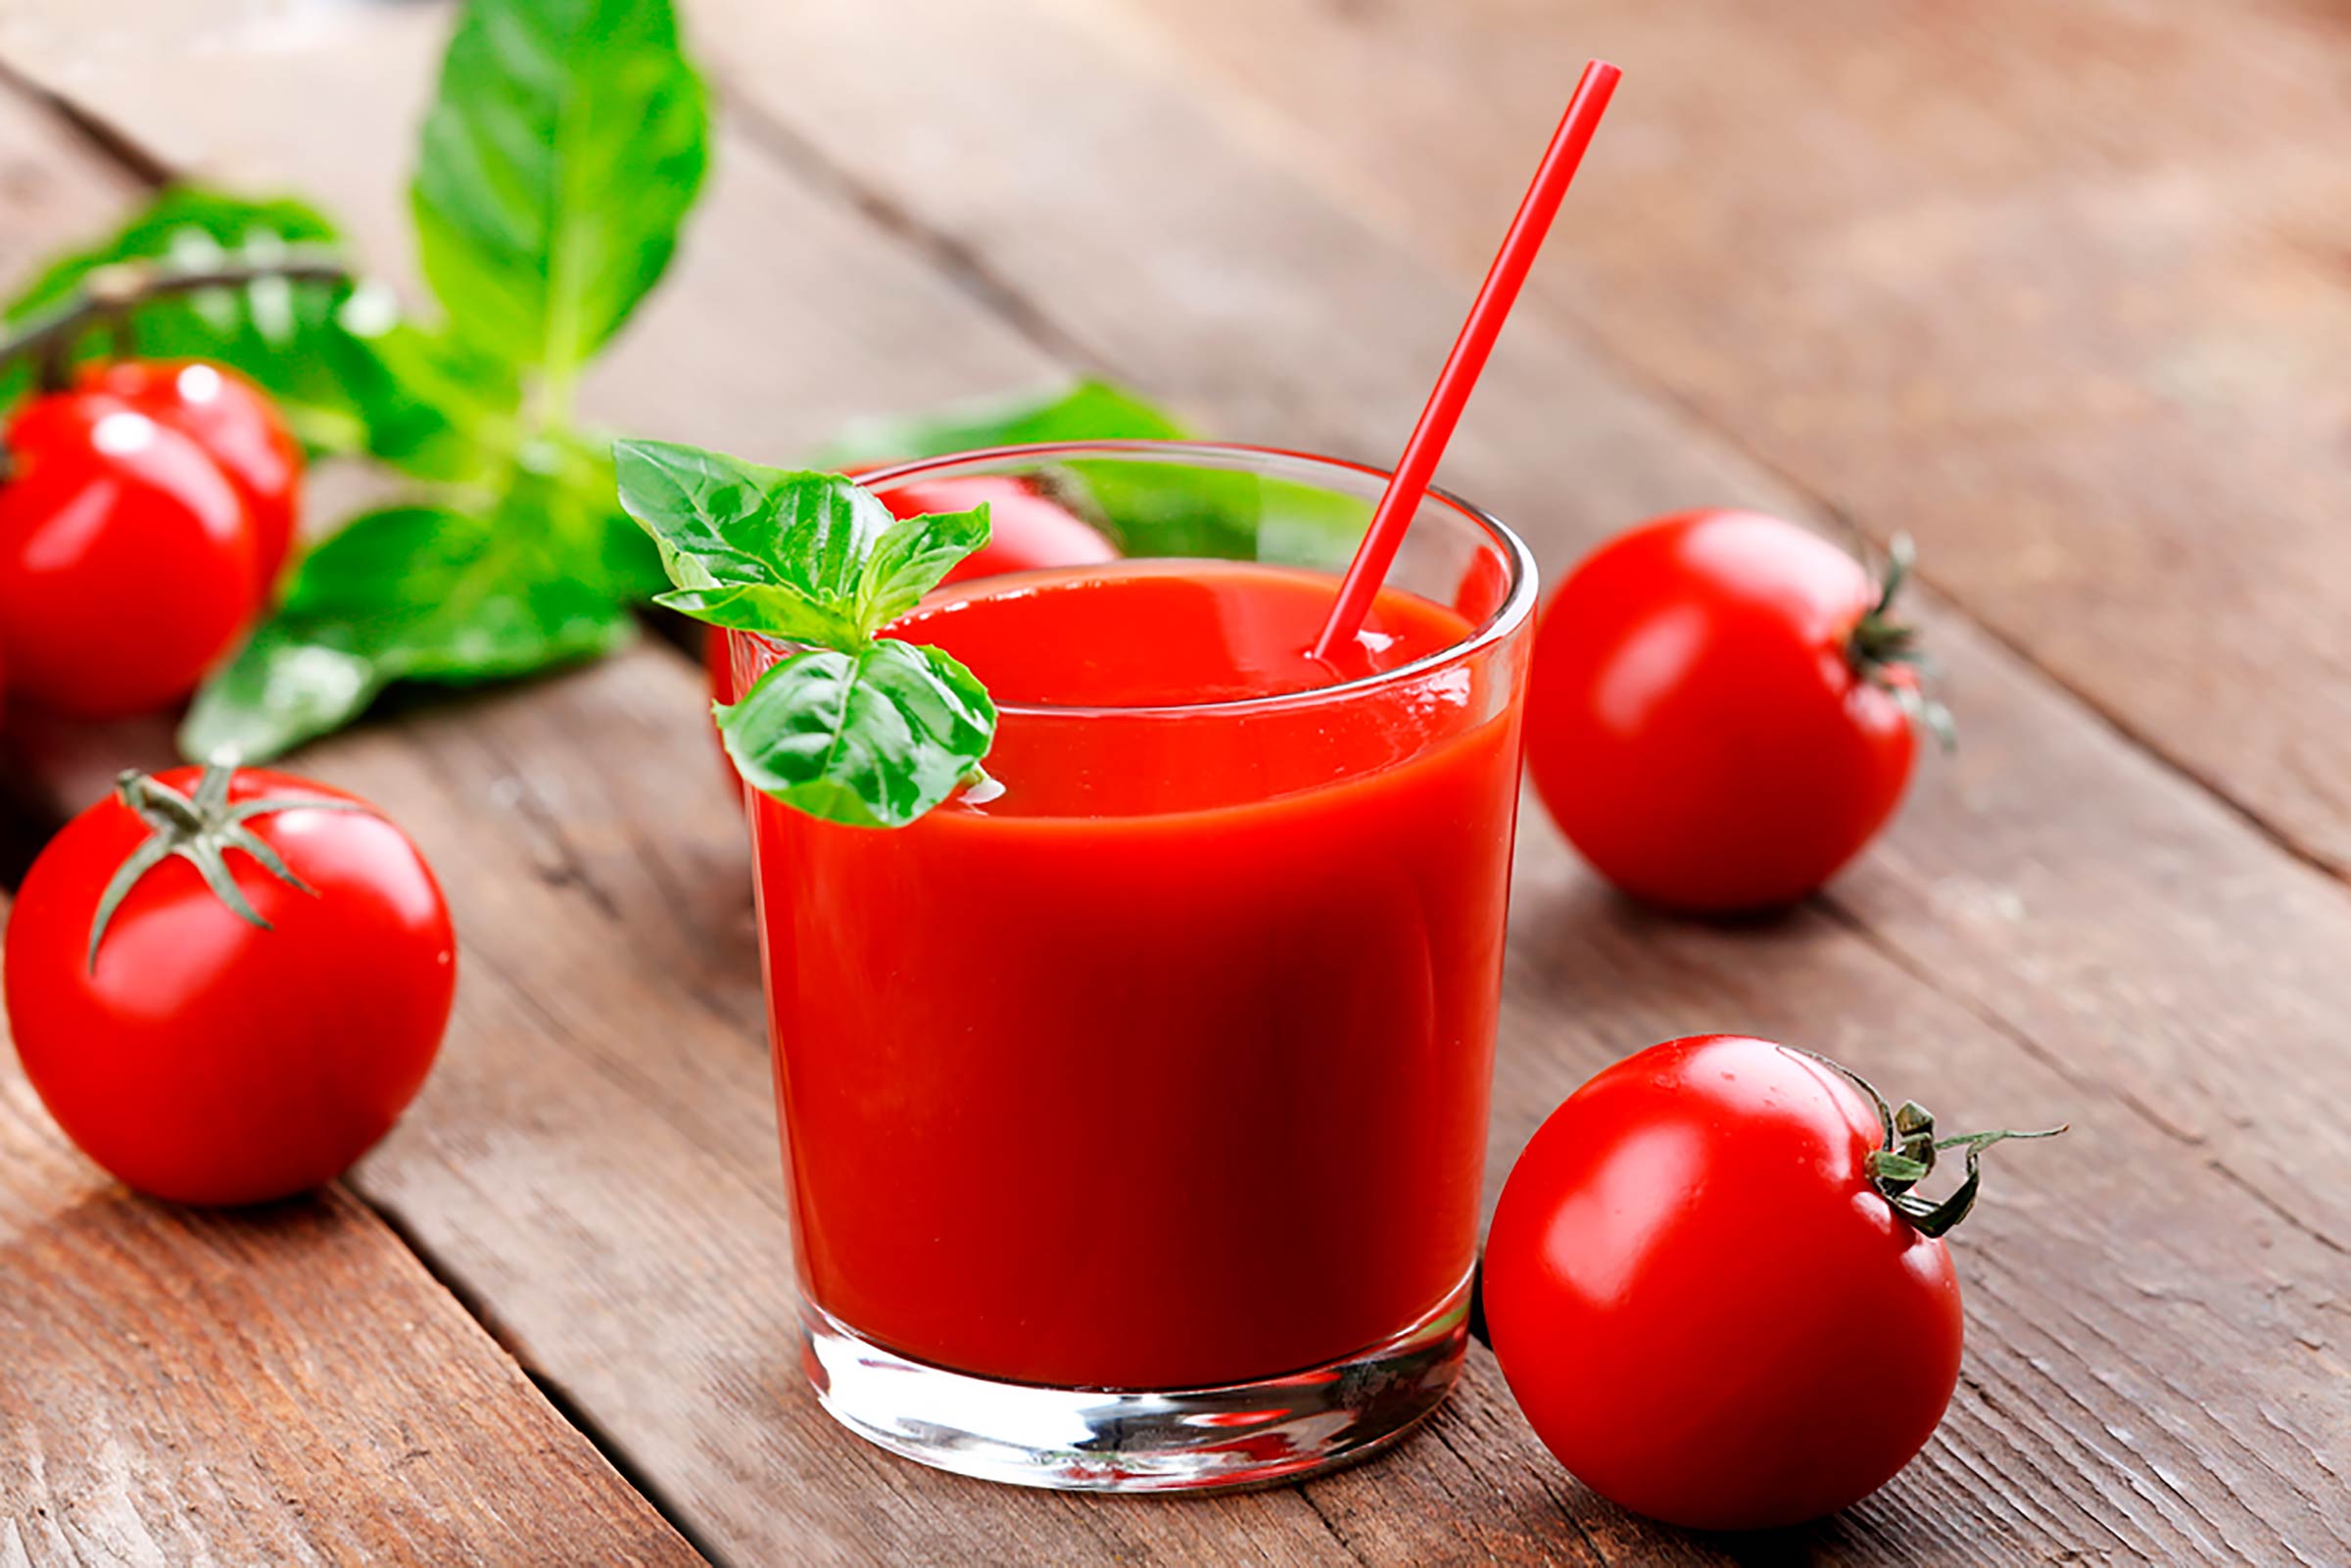 Tomato Soup And Juice Can Save You From Cancer And Make Skin Glow -  à¤µà¤¿à¤à¤¾à¤®à¤¿à¤à¤¸ à¤¸à¥ à¤­à¤°à¤ªà¥à¤° à¤à¤®à¤¾à¤à¤° à¤¹à¥ à¤à¥à¤£à¥à¤ à¤à¥ à¤à¤¾à¤¨, à¤¨à¤°à¥à¤µ à¤¸à¤¿à¤¸à¥à¤à¤® à¤à¥ à¤°à¤à¥ à¤¸à¥à¤¹à¤¤à¤®à¤à¤¦, à¤à¥à¤à¤¸à¤°  à¤¸à¥ à¤­à¥ à¤¬à¤à¤¾à¤ |